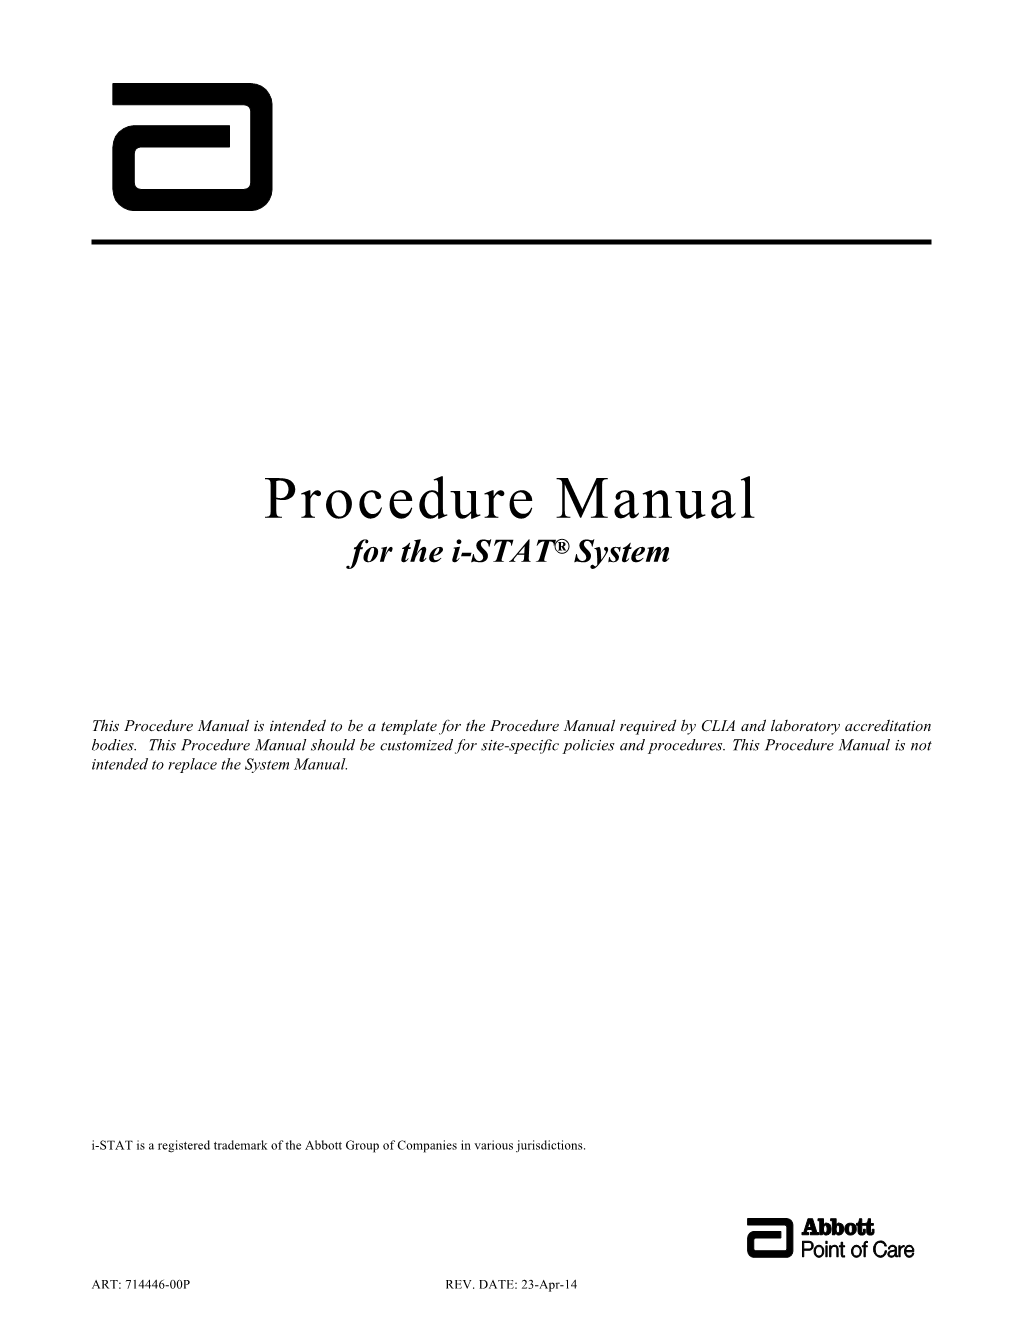 Procedure Manual for the I-STAT® System